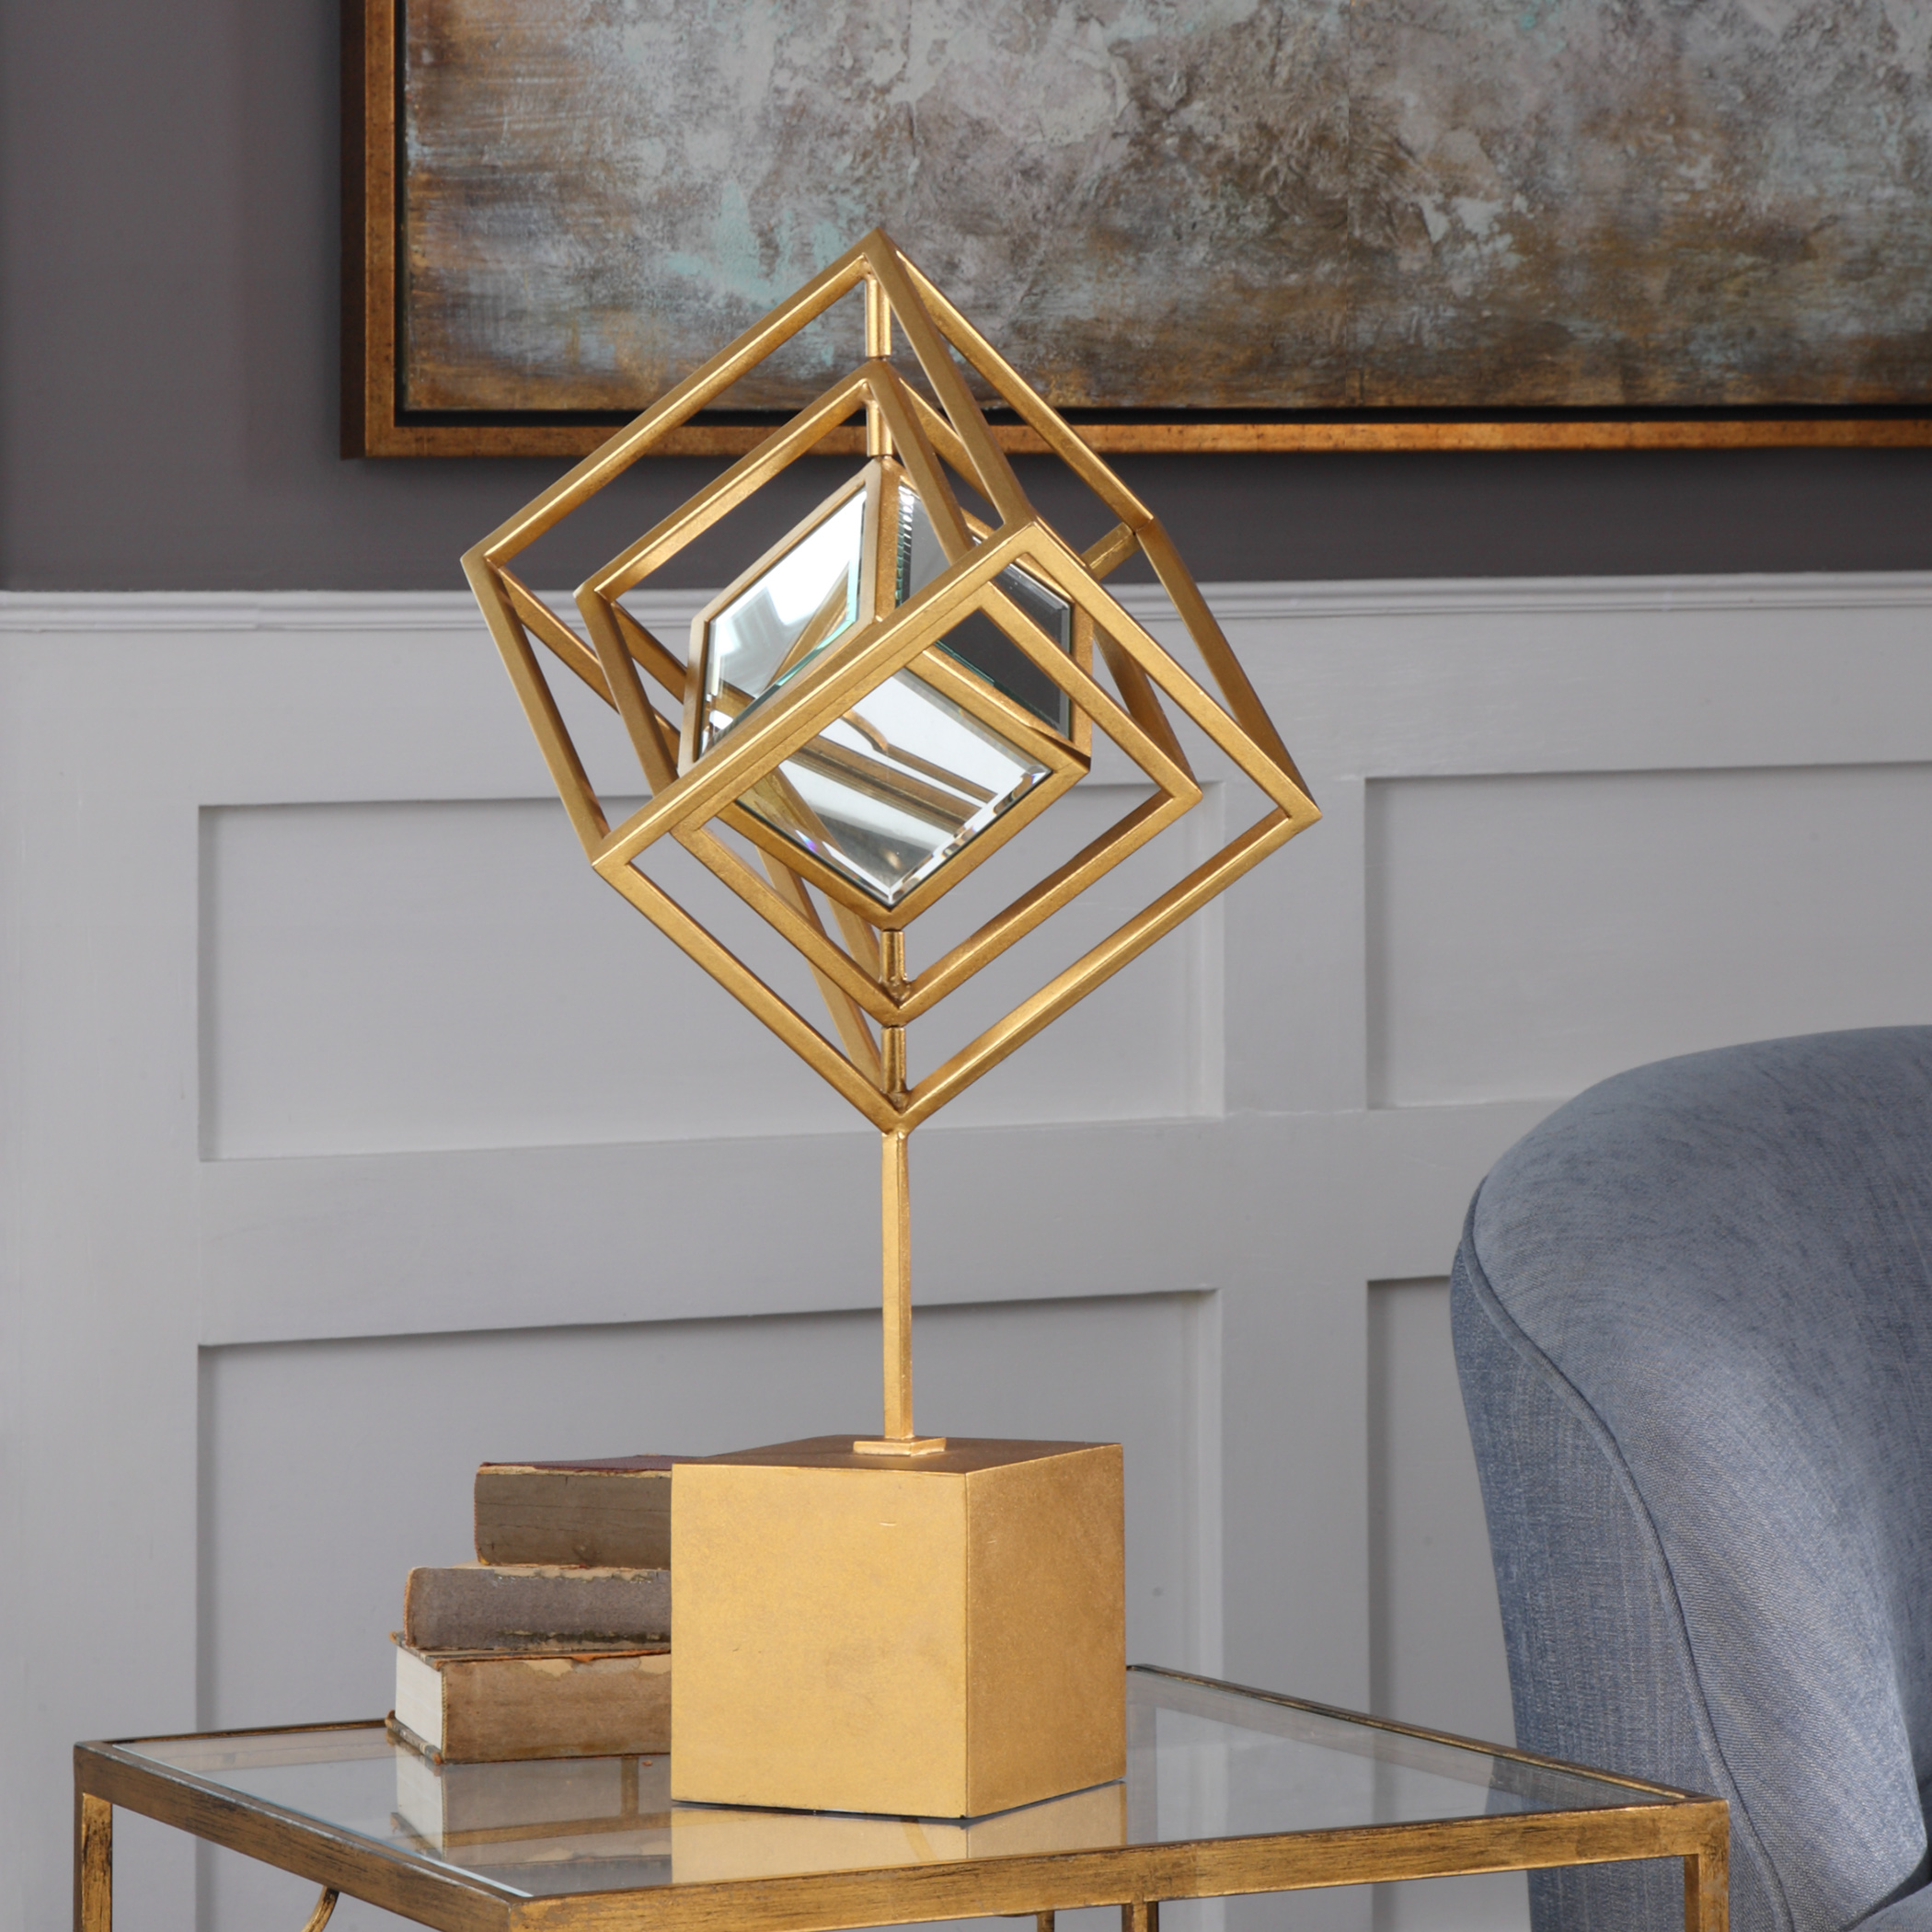 Venya sculpture with mirrored cube center from Uttermost